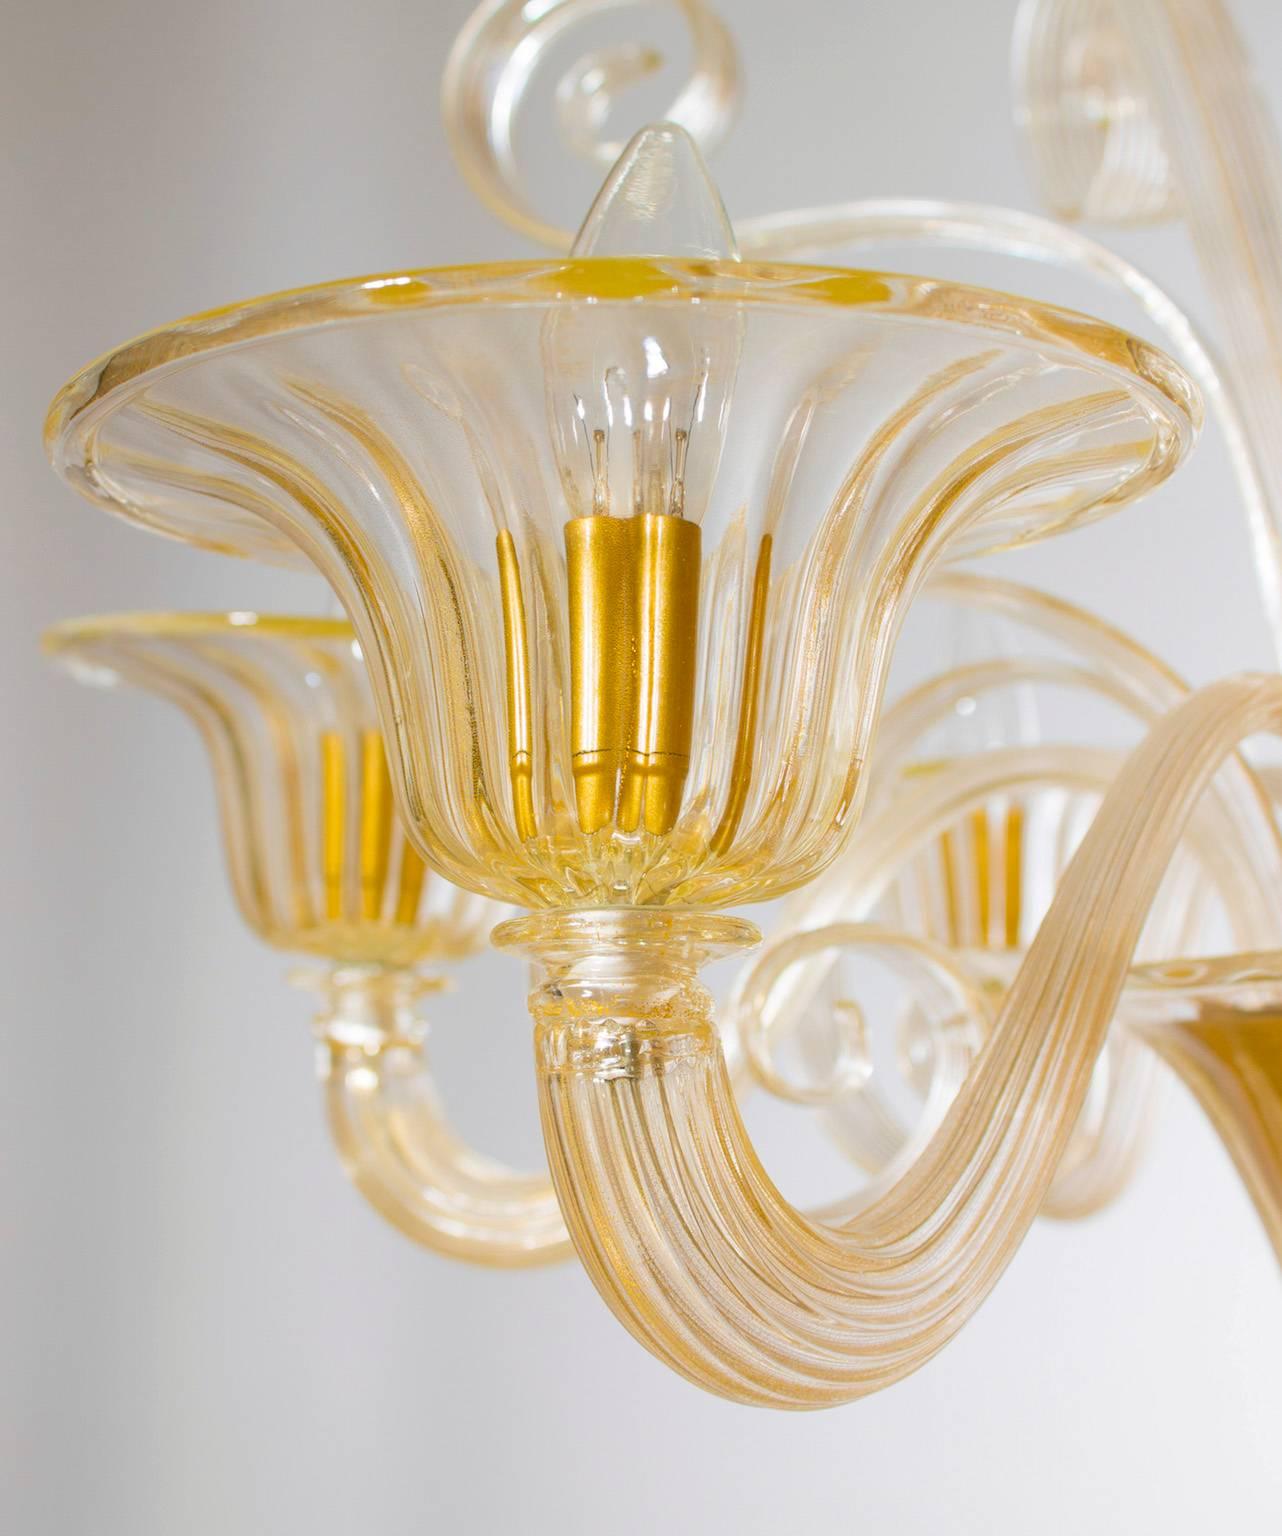 Late 20th Century Crafted Blown Murano Glass Chandelier adorned with Gold Pastorals 1990s Italy  For Sale